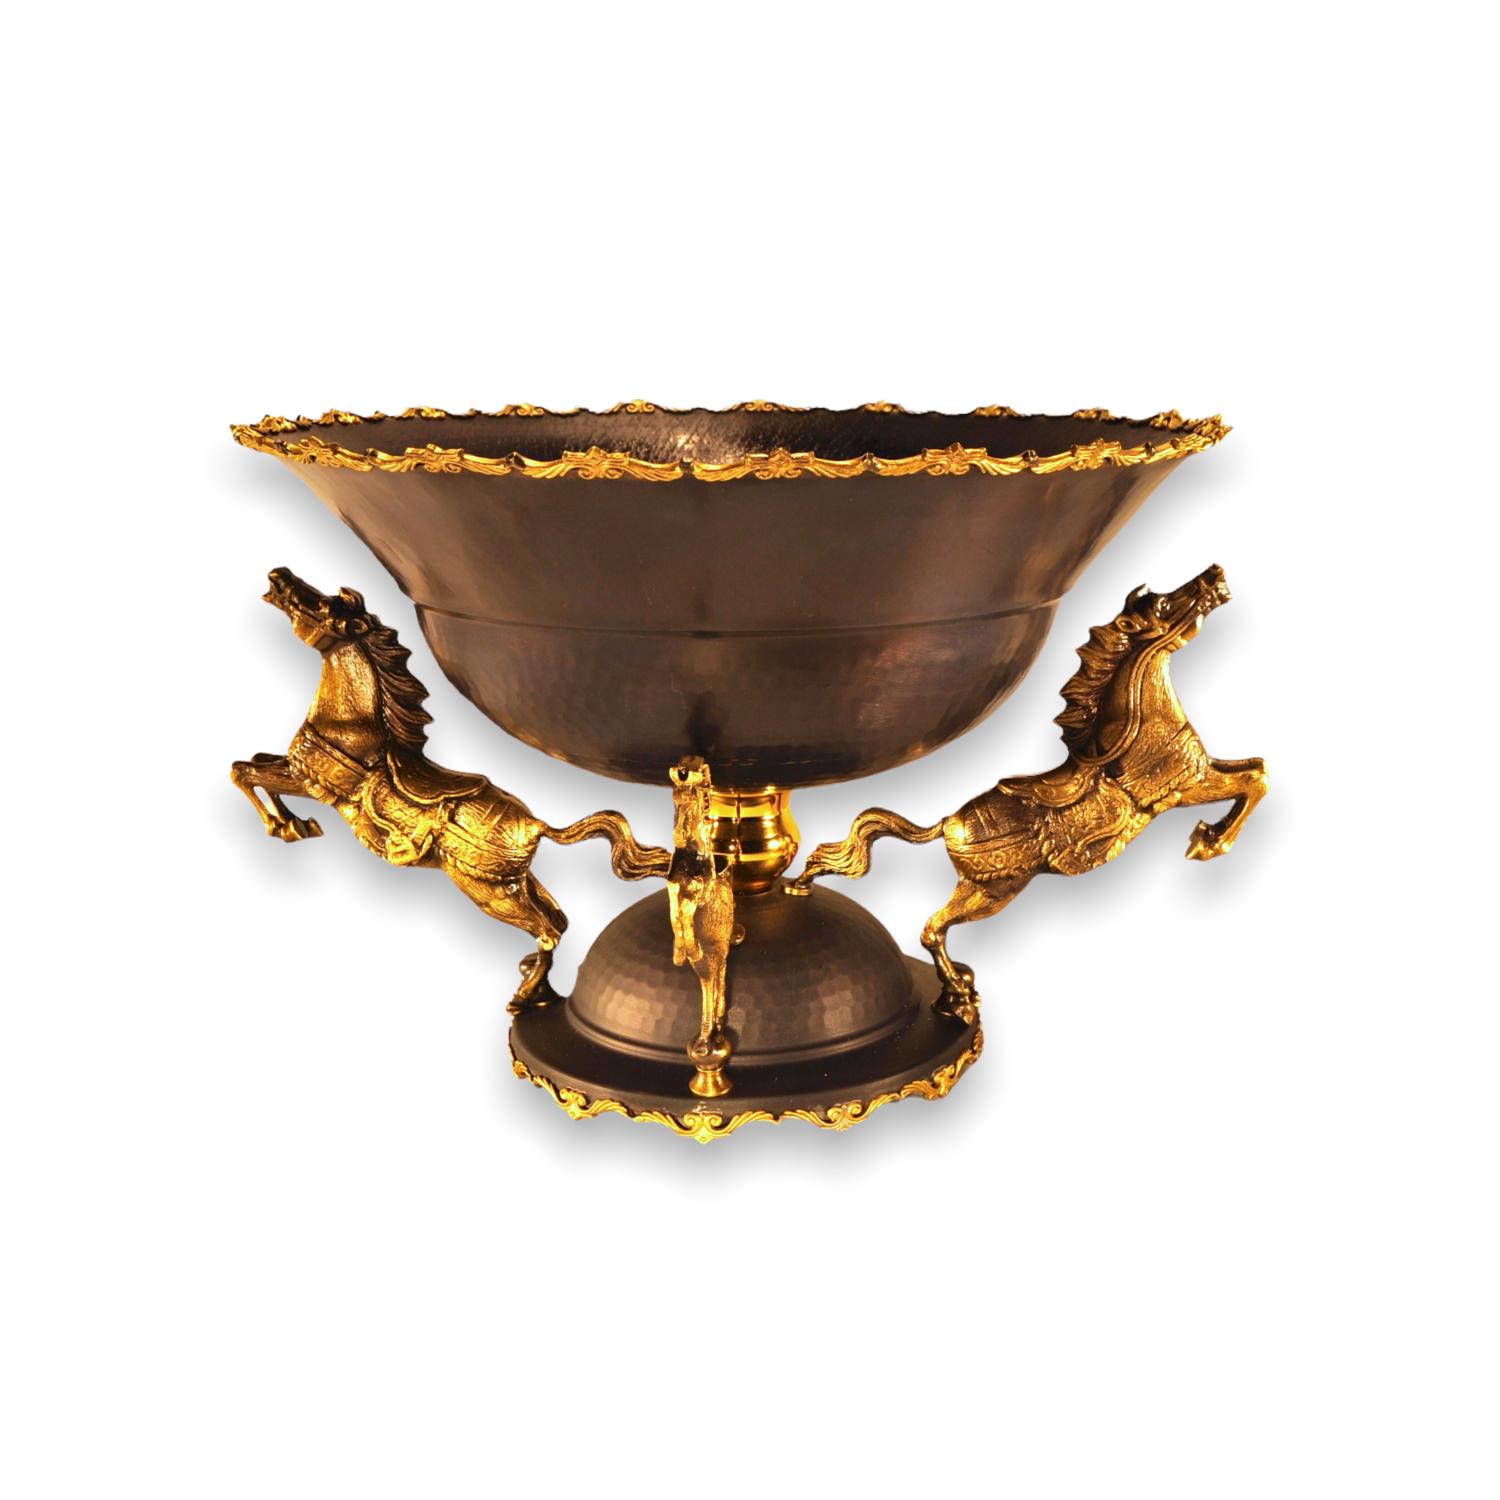 Stand Four Horse Mix Copper Bowl